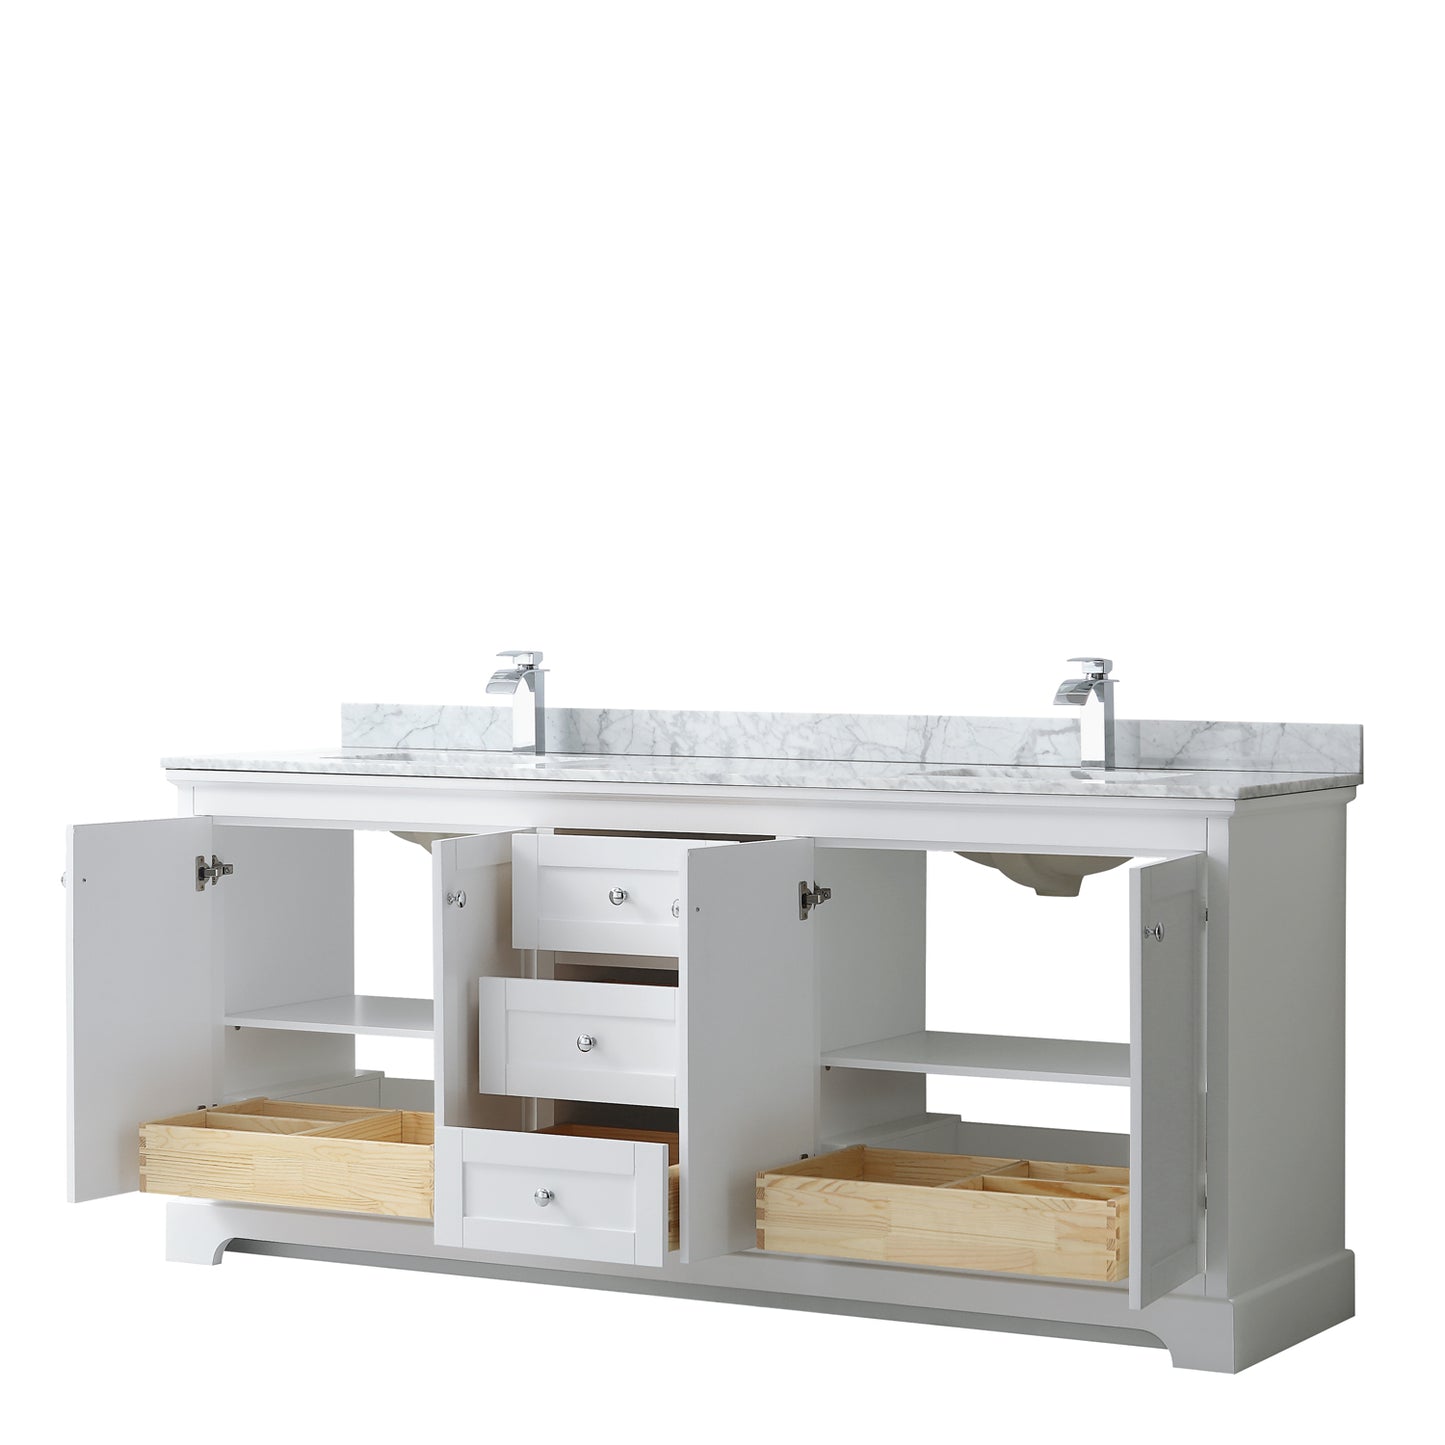 Wyndham Collection Avery 80 Inch Double Bathroom Vanity in White Carrara Marble Countertop, Undermount Square Sinks, and No Mirror - Luxe Bathroom Vanities